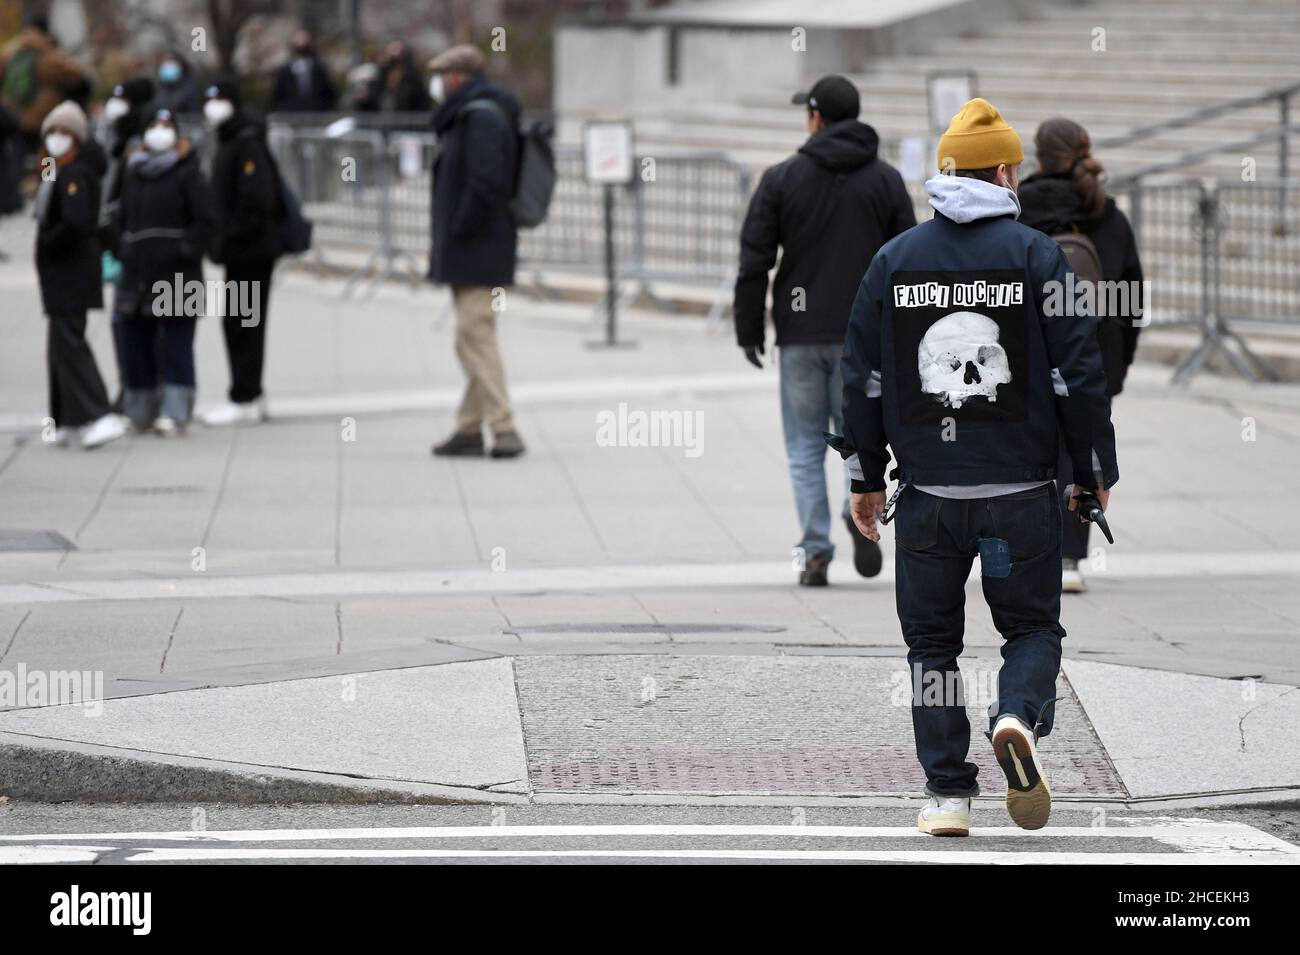 New York, USA. 27th Dec, 2021. A man (r) is seen wearing a jacket with the “Fauci Ouchie” wording and skull design on the back, in New York, NY, December 27, 2021. The term refers to Anthony Fauci, Chief Medical Advisor to the President of the United States and the rhyming of “Ouchie” referring to the COVID-19 injection which may be painful. (Photo by Anthony Behar/Sipa USA) Credit: Sipa USA/Alamy Live News Stock Photo